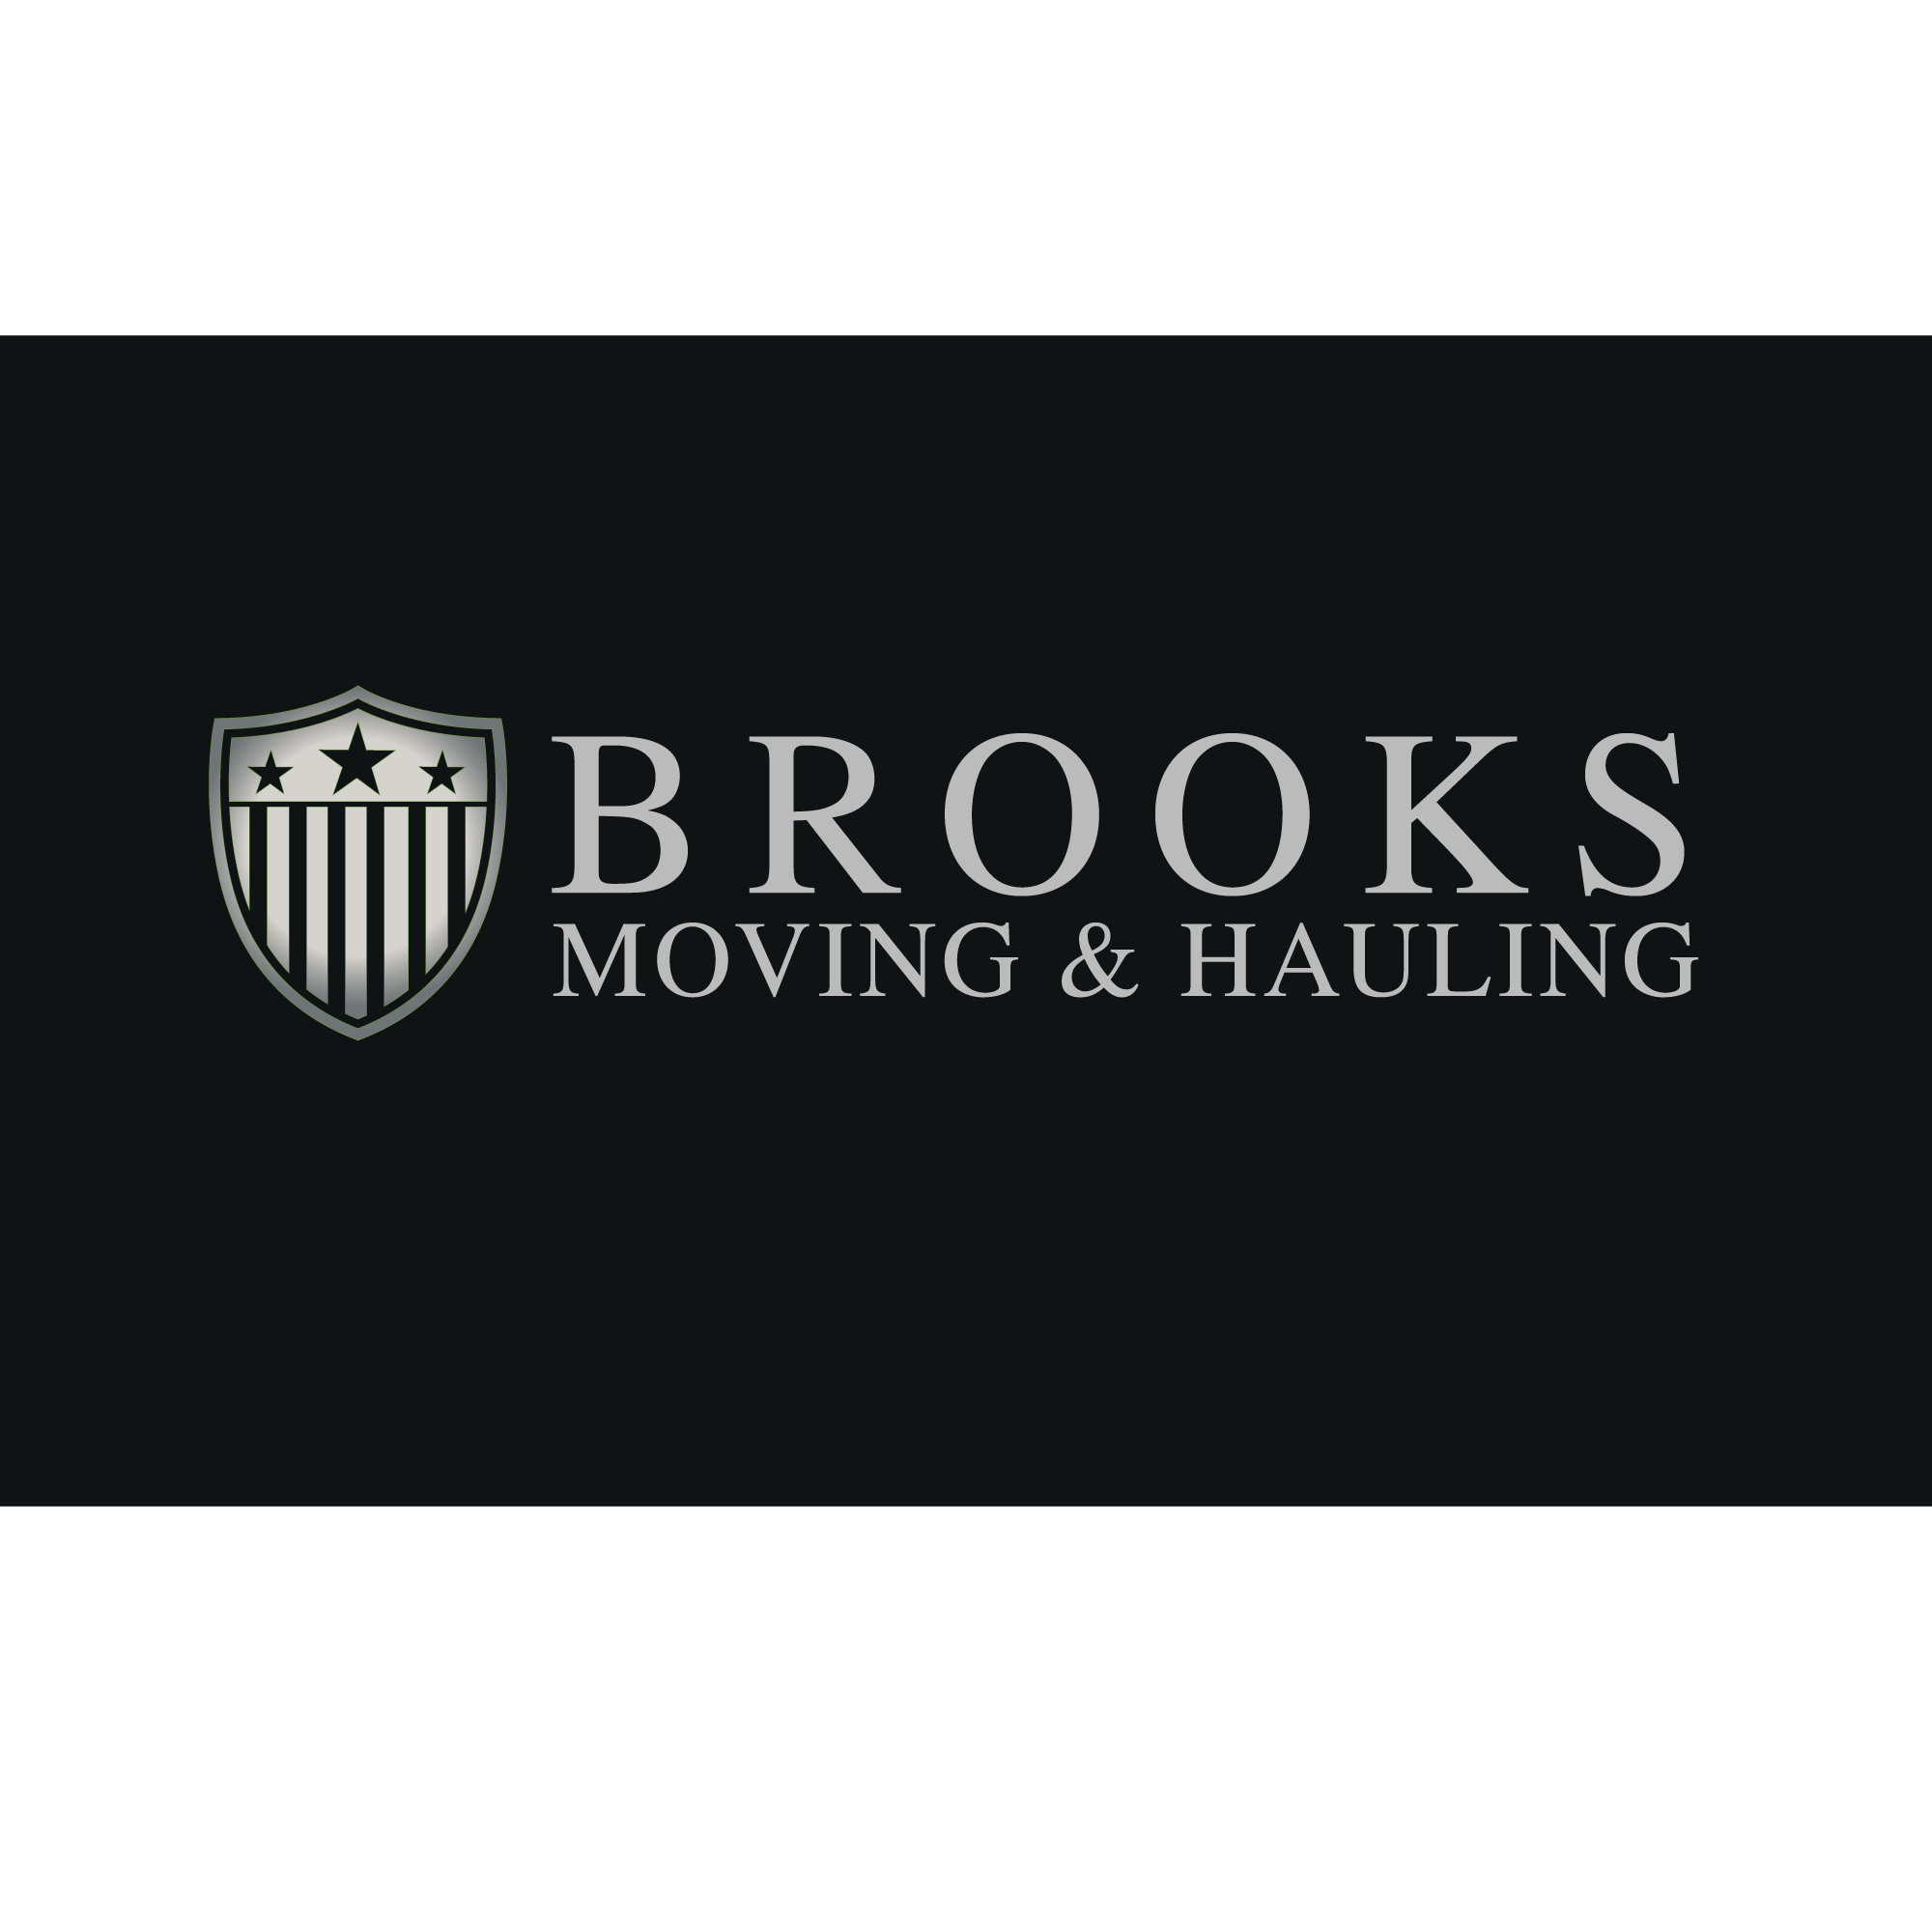 Brooks Moving and Hauling Affirms Its Position as The Number One Residential Moving Company